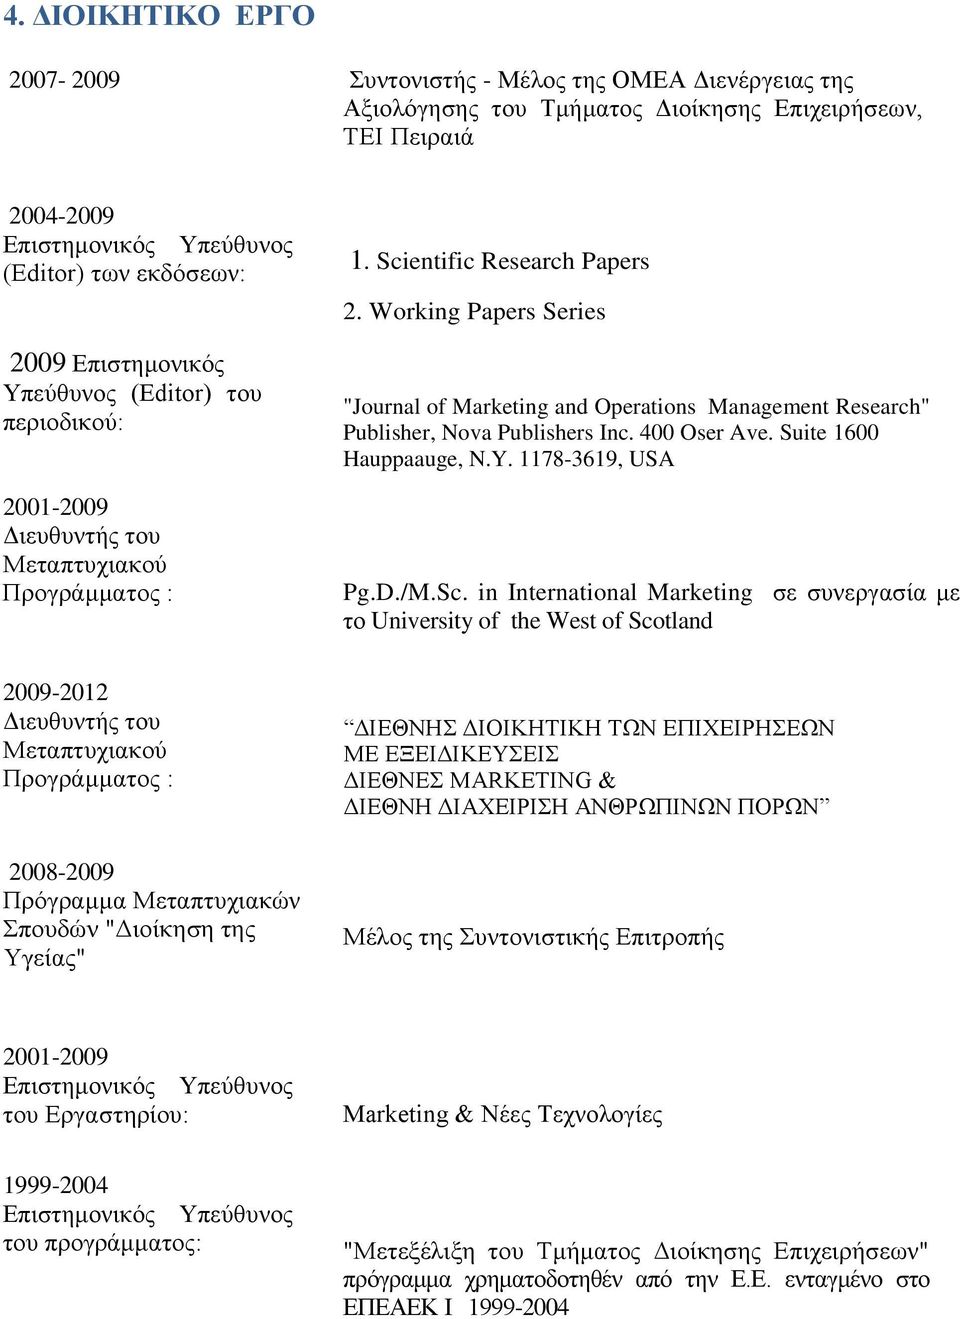 Working Papers Series "Journal of Marketing and Operations Management Research" Publisher, Nova Publishers Inc. 400 Oser Ave. Suite 1600 Hauppaauge, N.Y. 1178-3619, USA Pg.D./M.Sc.